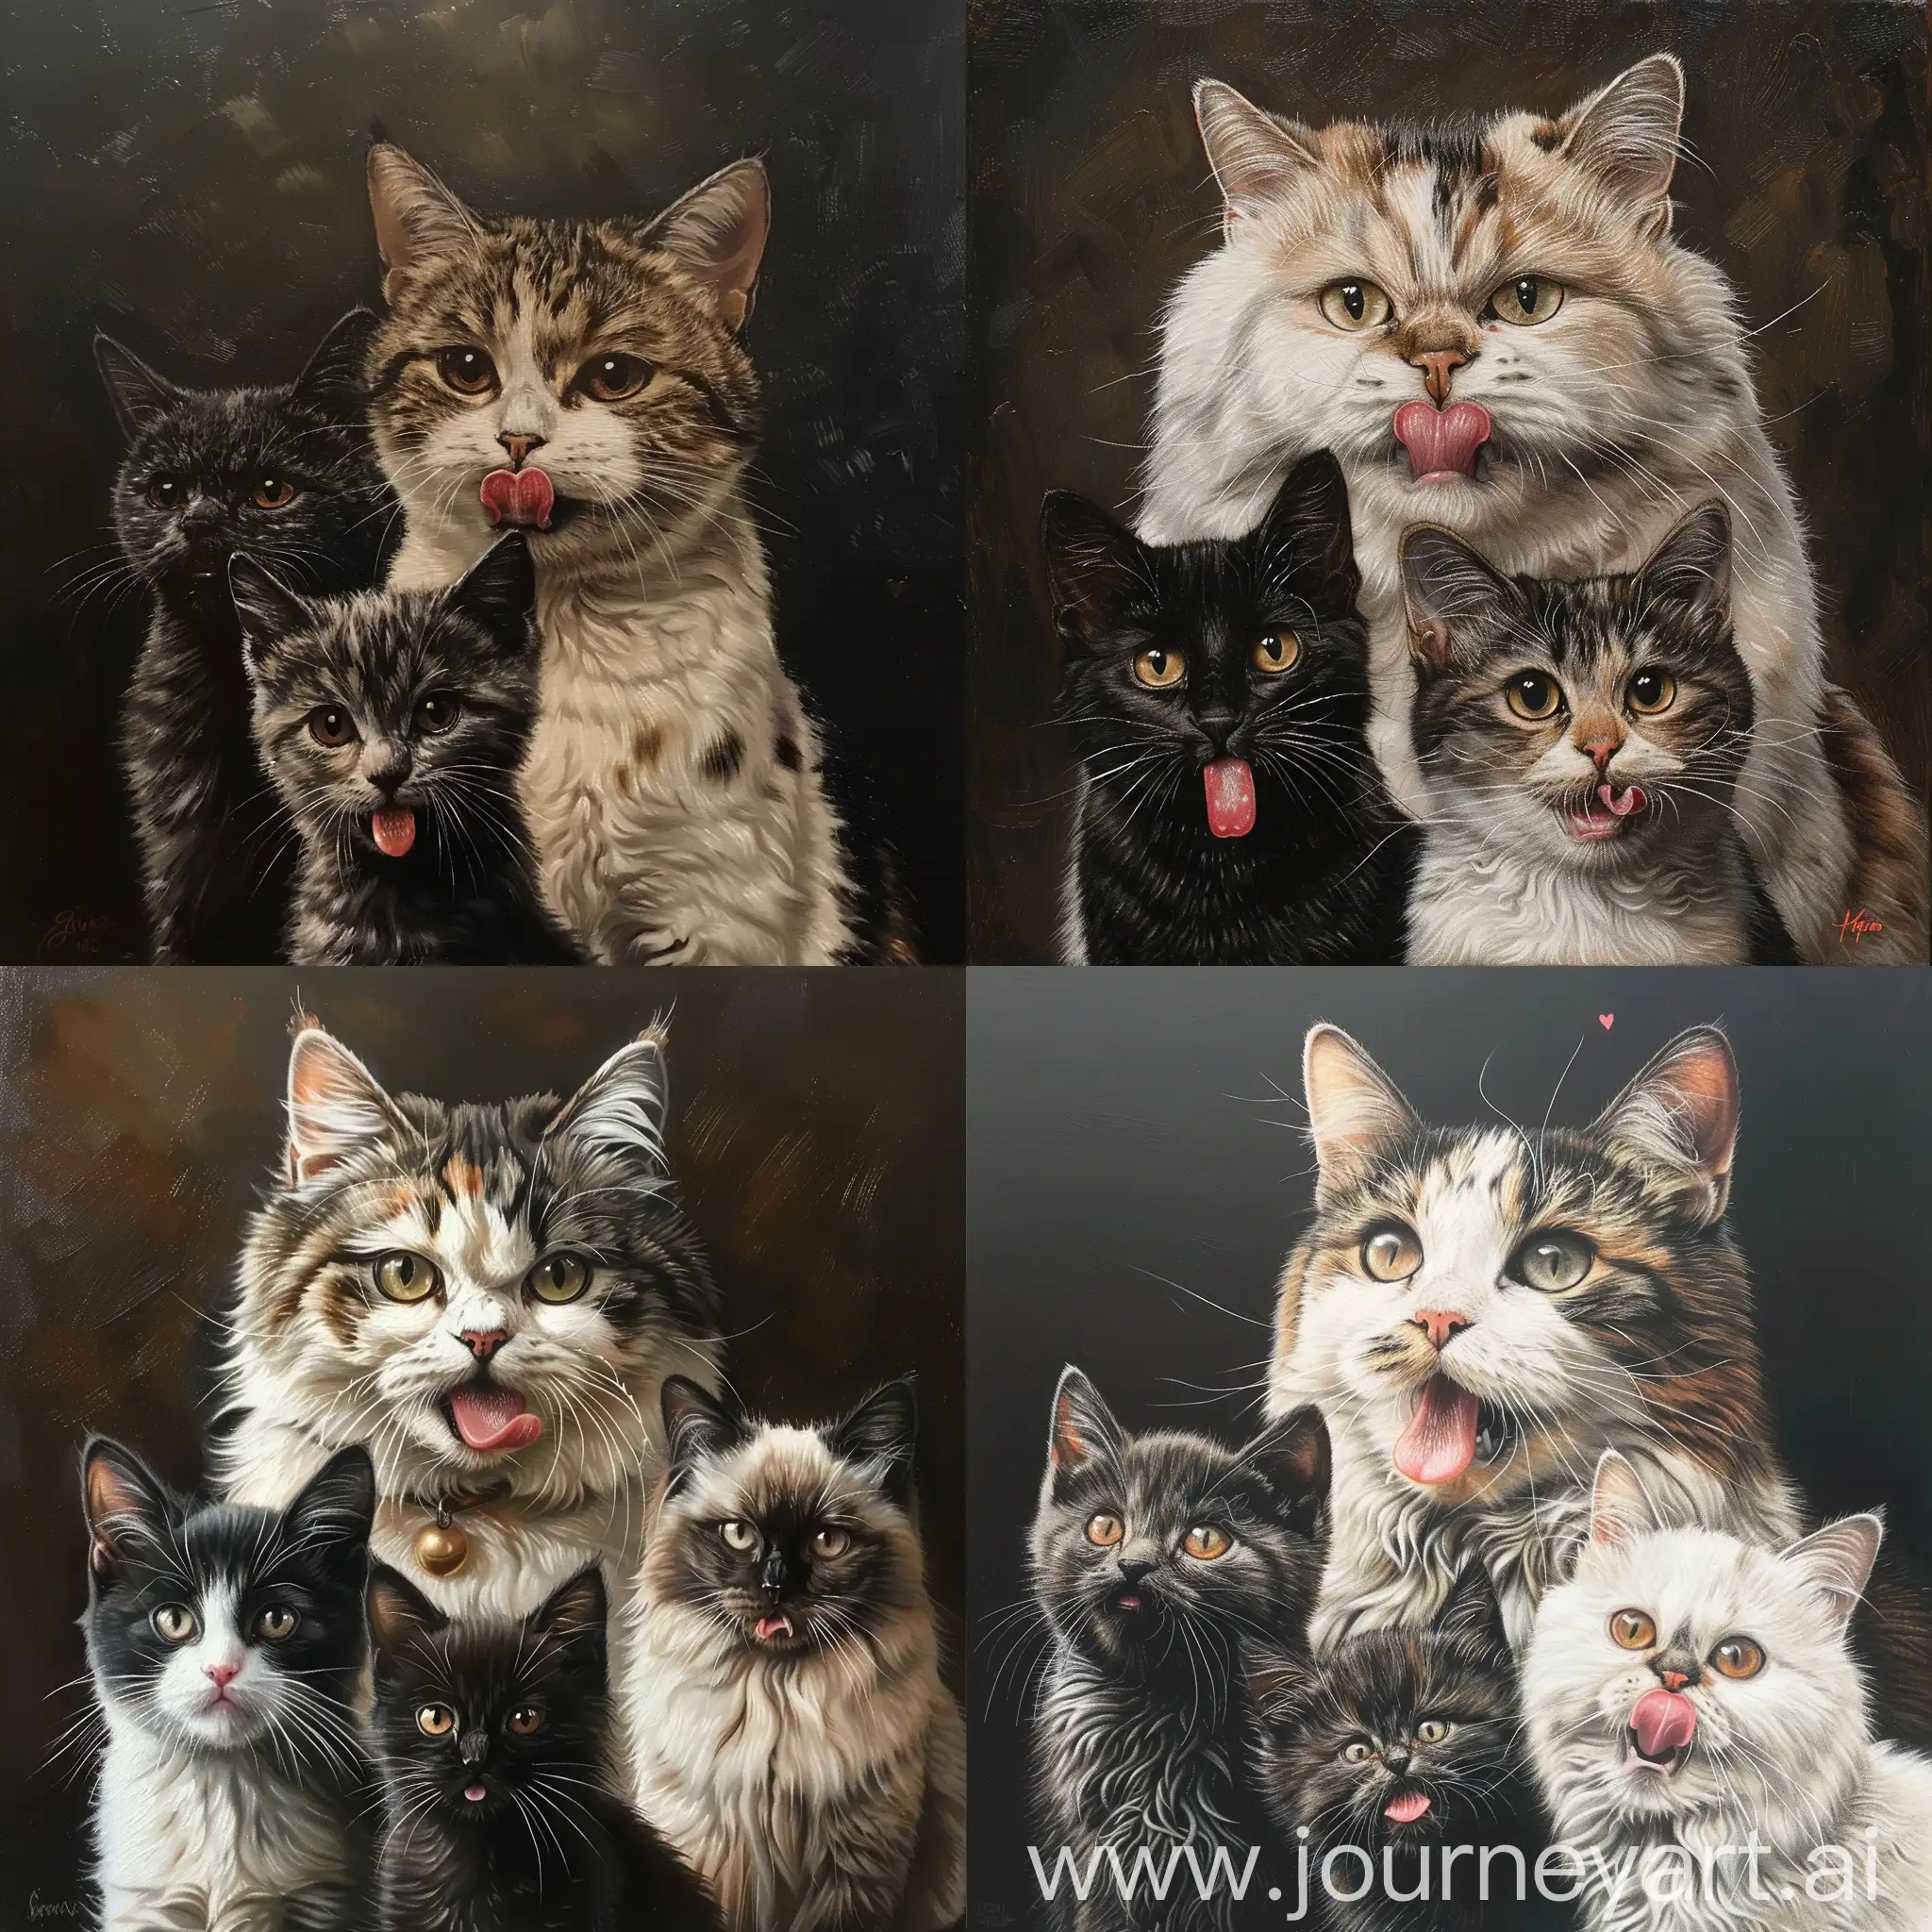 A portrait of 3 cats. The biggest cat is white with patches of brown stripes and as a heart shaped spot on it's nose. The second largest cat is black and it's tongue is hanging out. The smallest cat is grey and looks like a runt.